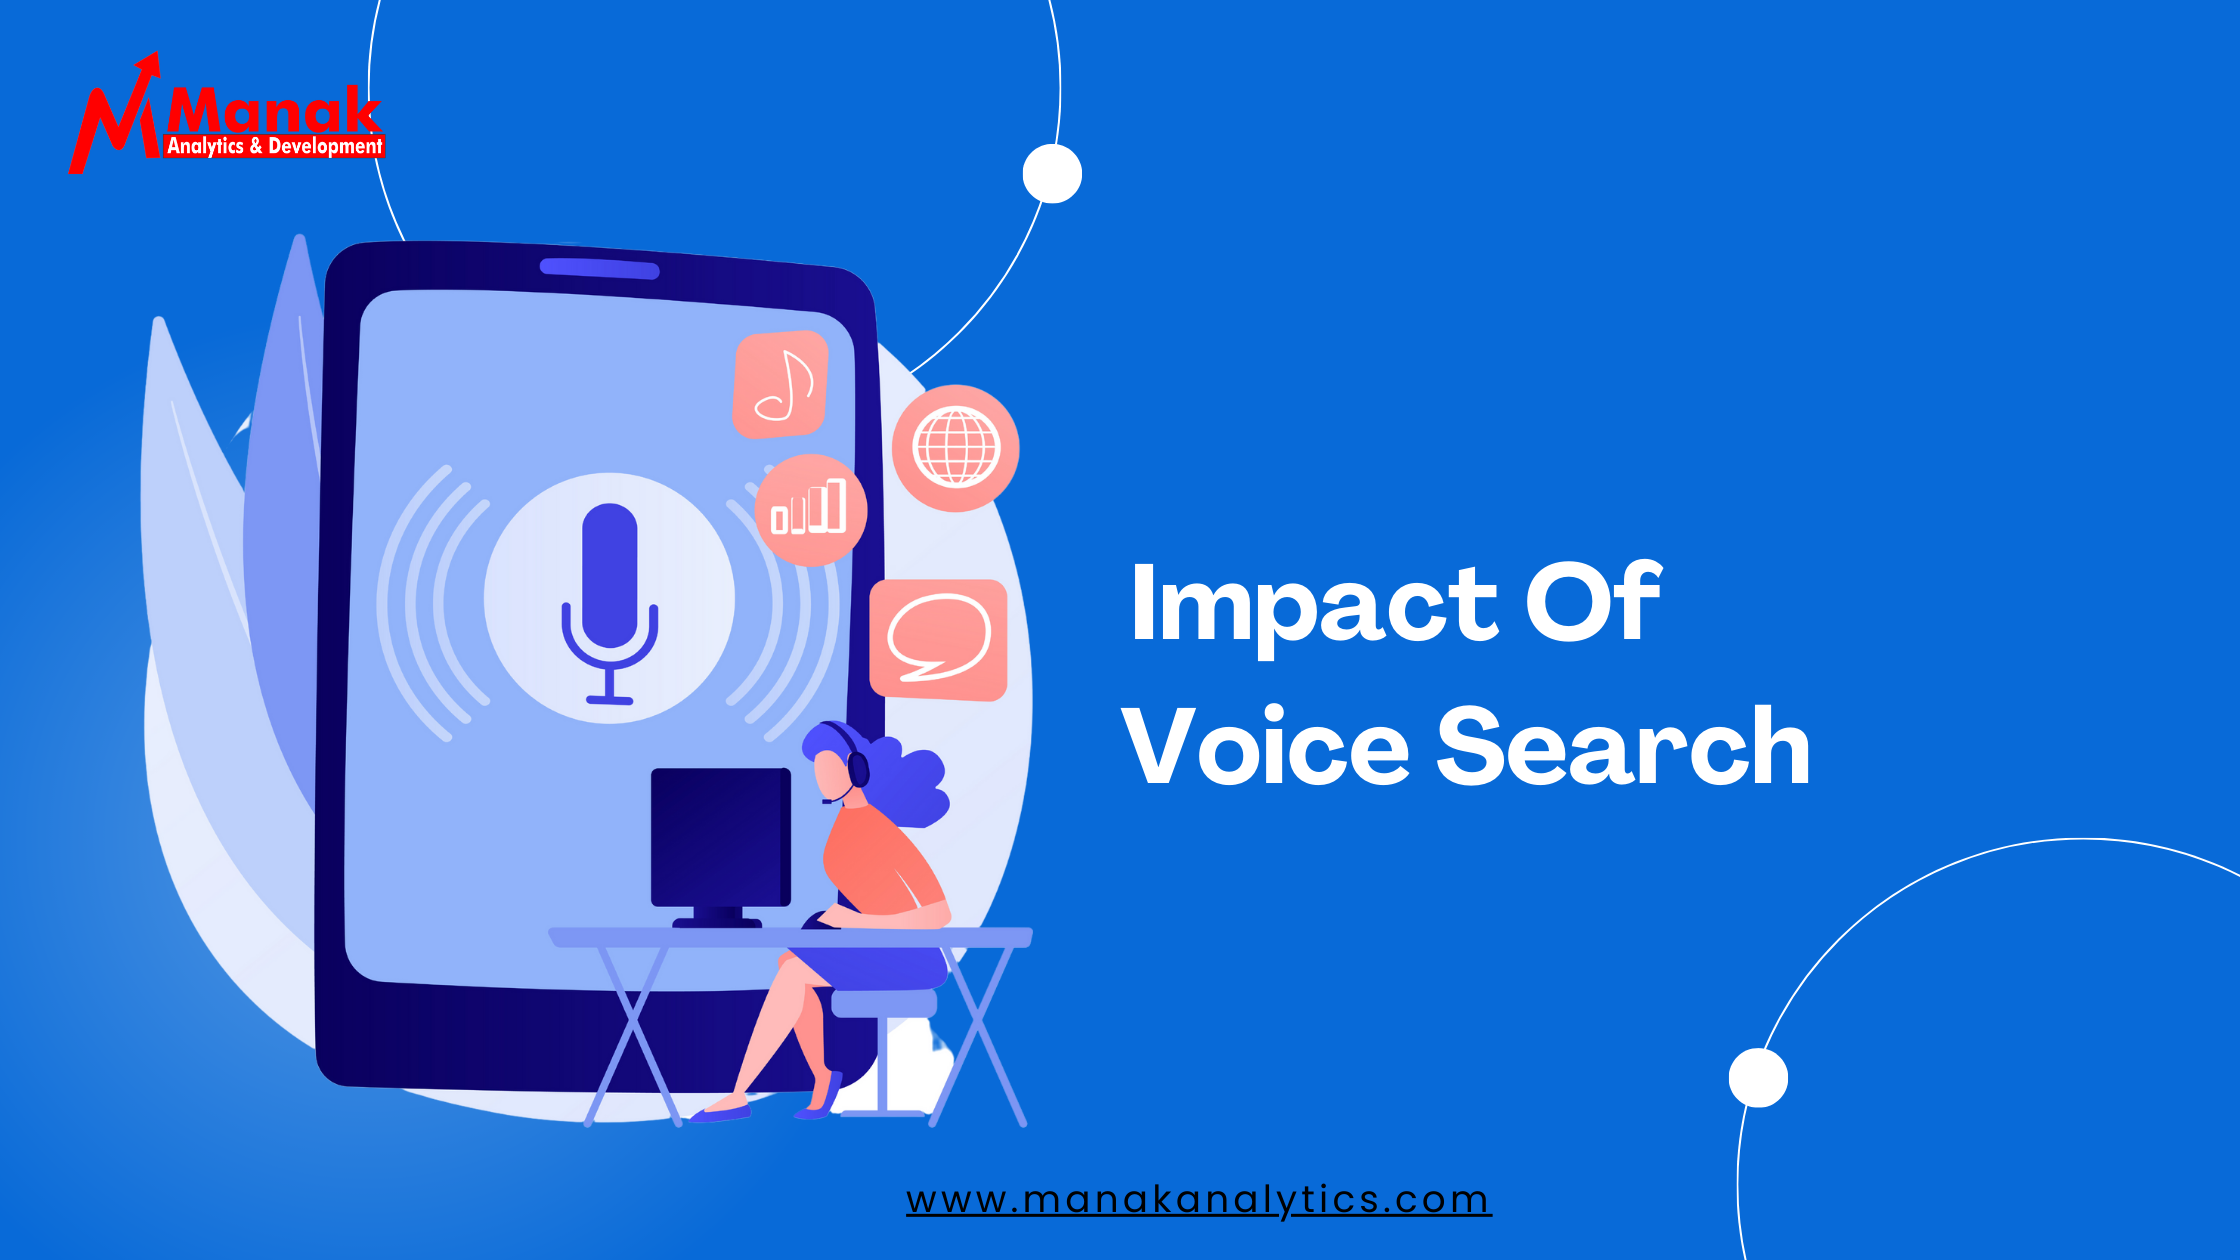 The Impact Of Voice Search